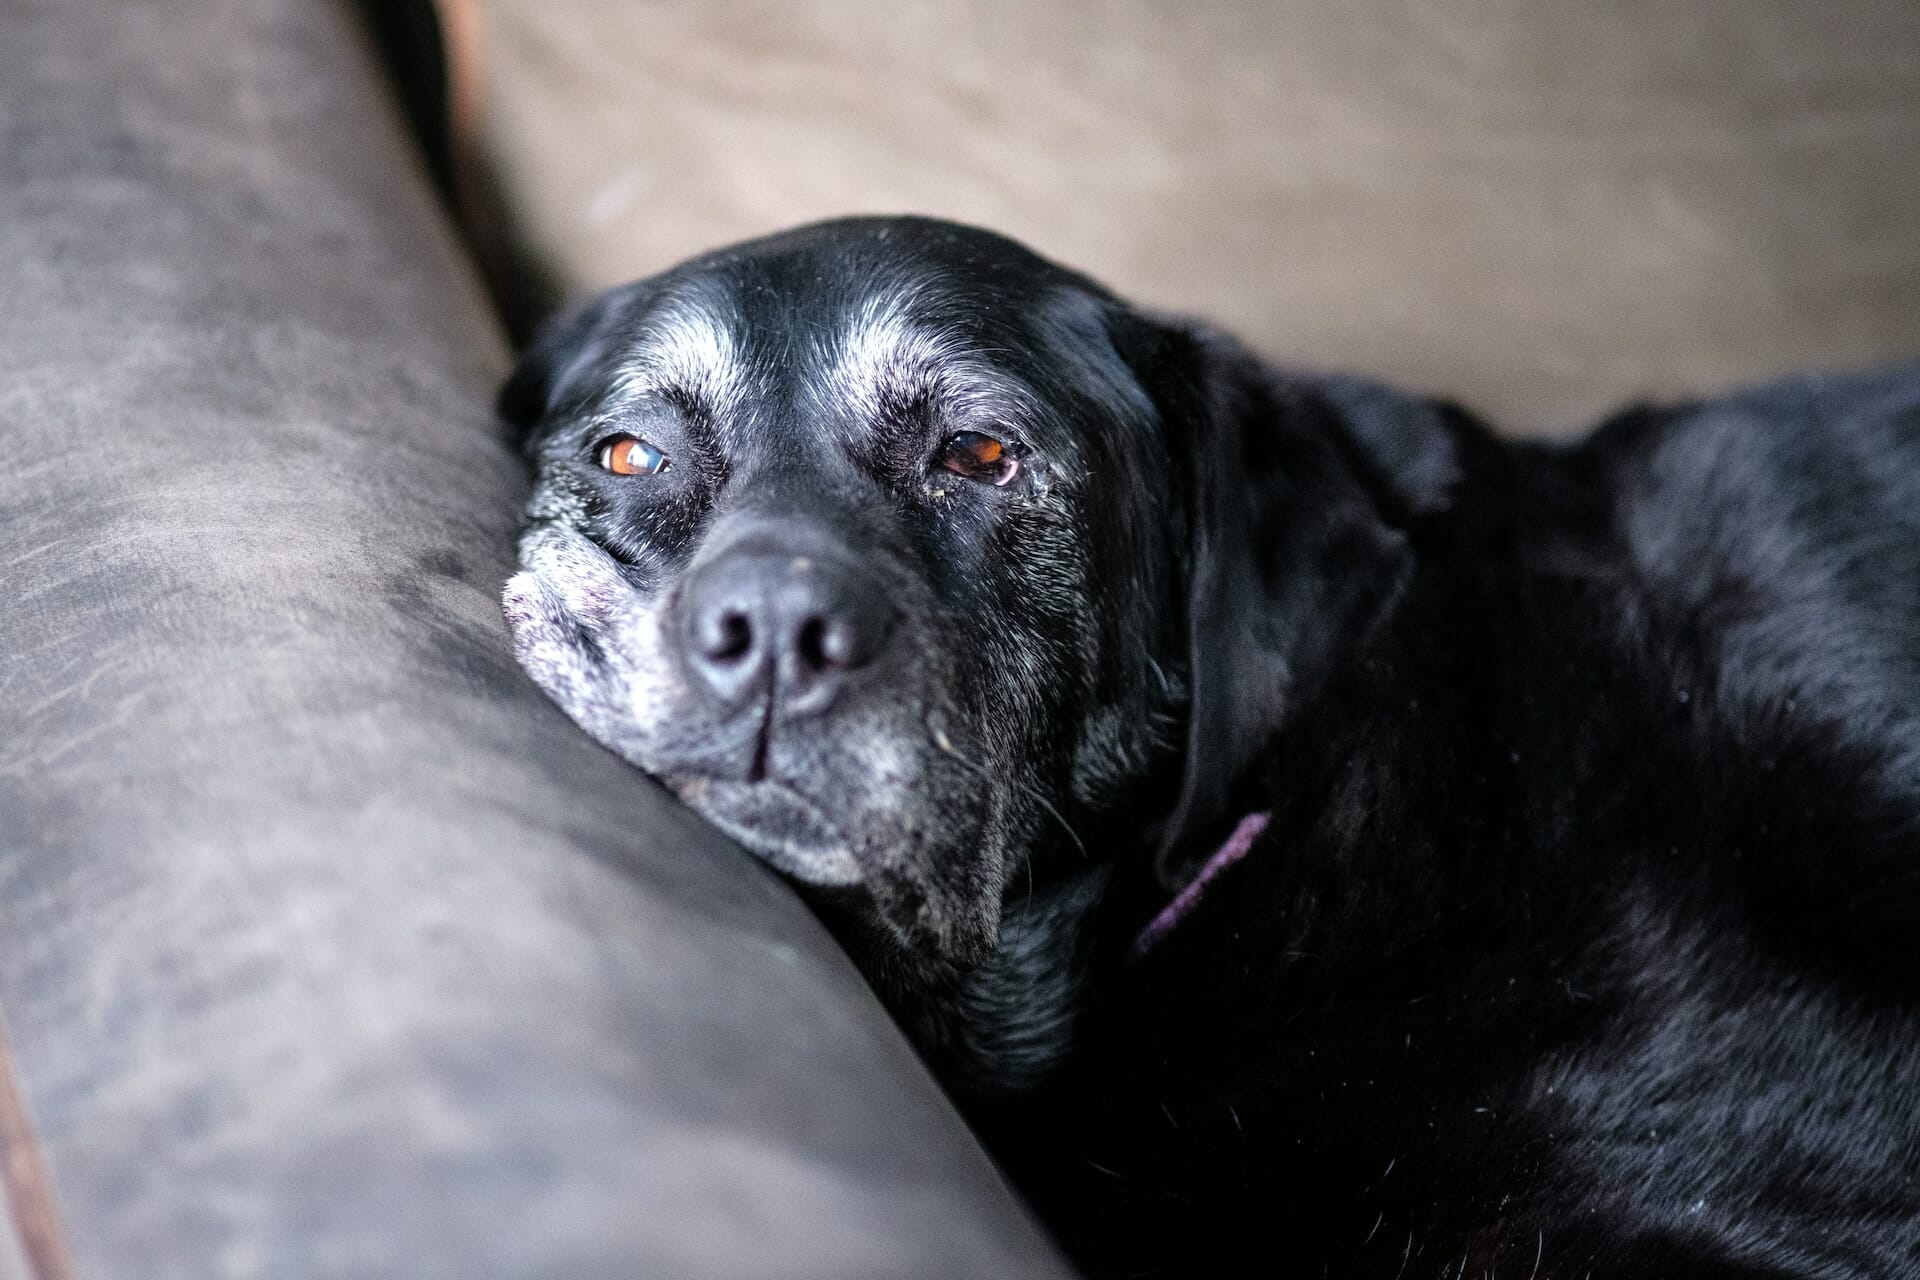 Senior Dog Peeing in House: Finding a Humane Solution